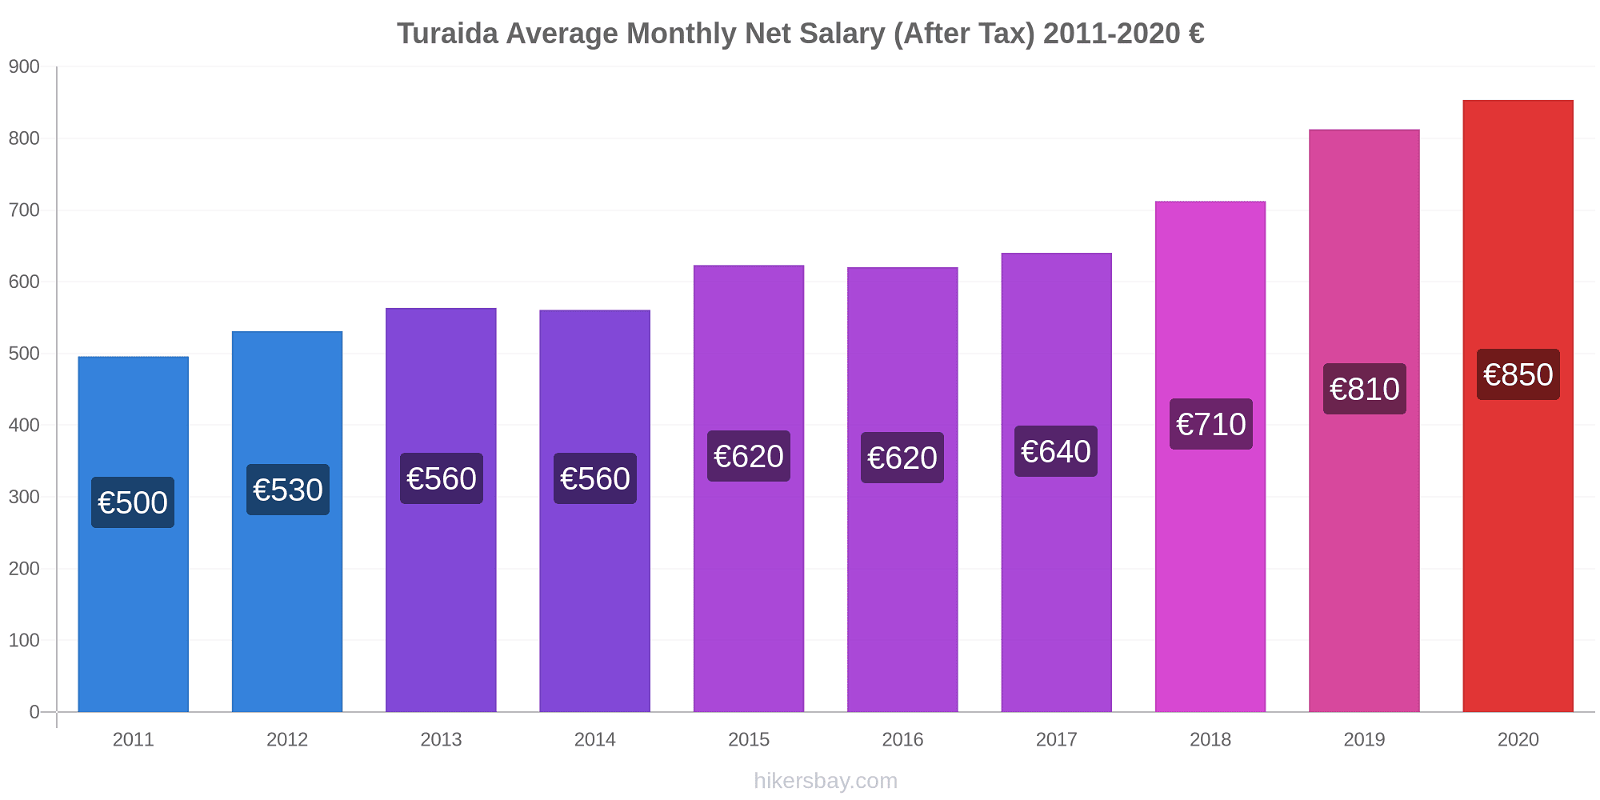 Turaida price changes Average Monthly Net Salary (After Tax) hikersbay.com